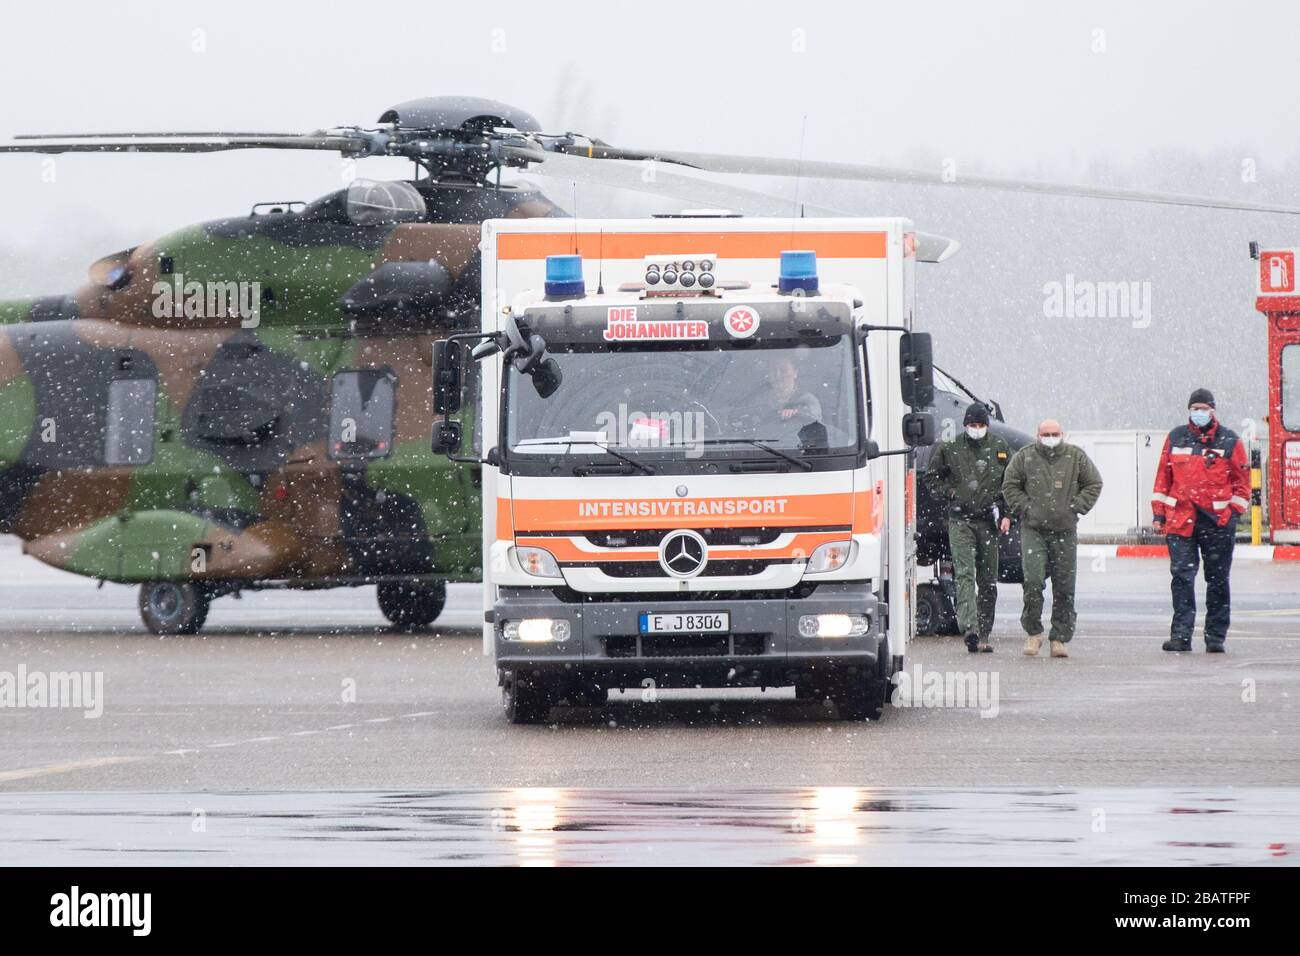 29 March 2020, North Rhine-Westphalia, Mülheim an der Ruhr: An intensive care transport of the Johanniter drives over the apron of the airport in front of a military helicopter. The helicopter was used to transport two patients from Metz, France, to Mühlheim for treatment at the University Hospital in Essen. Photo: Marcel Kusch/dpa Stock Photo